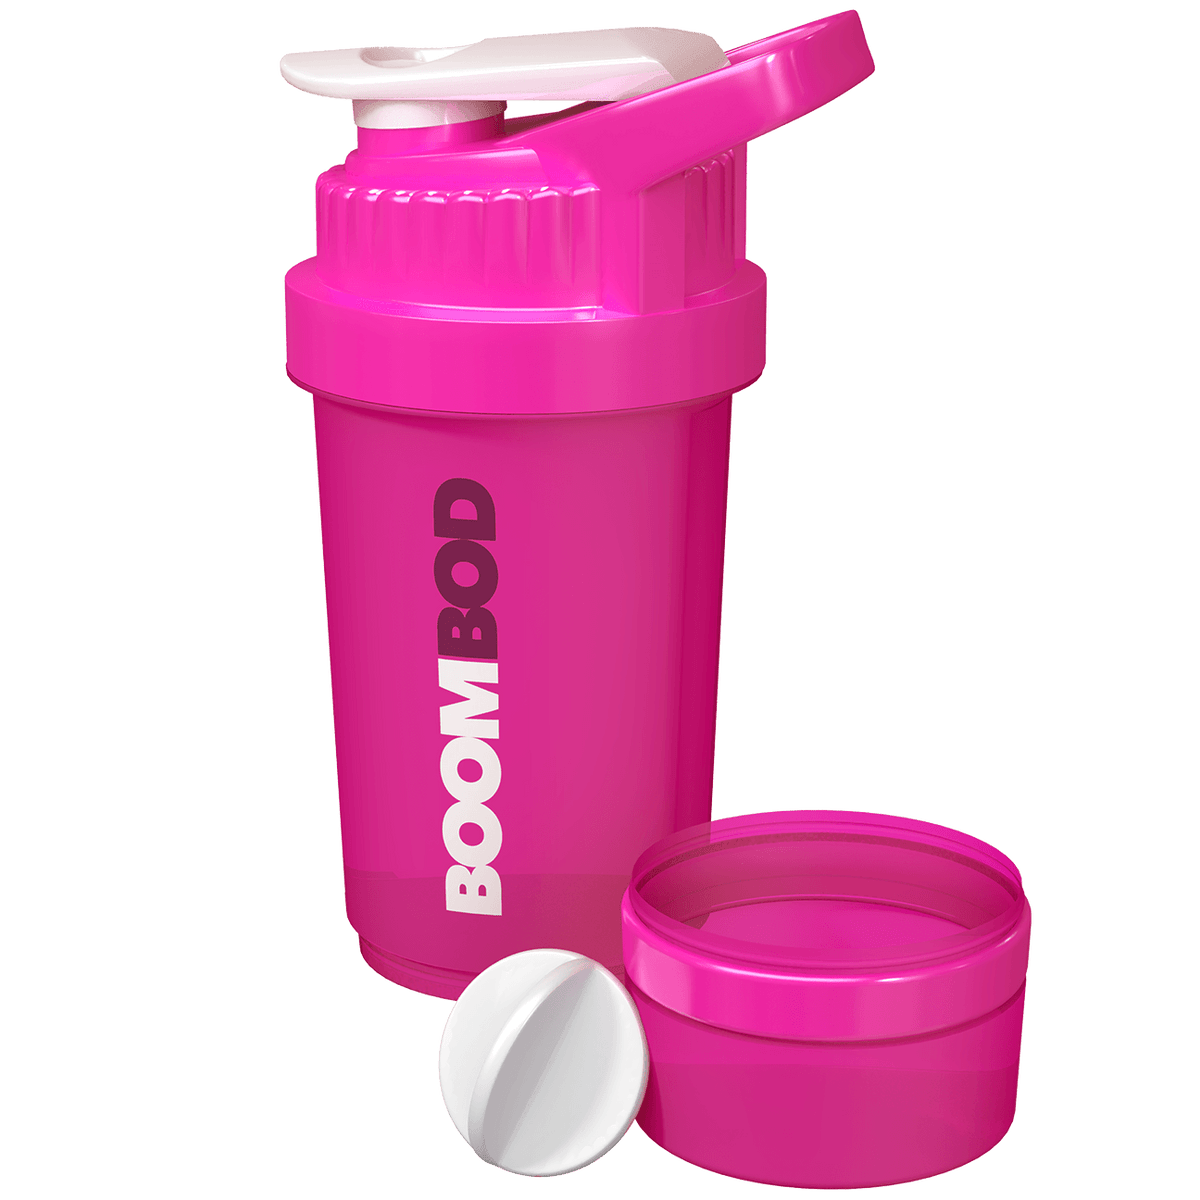 SHAKER CUP 16 OZ